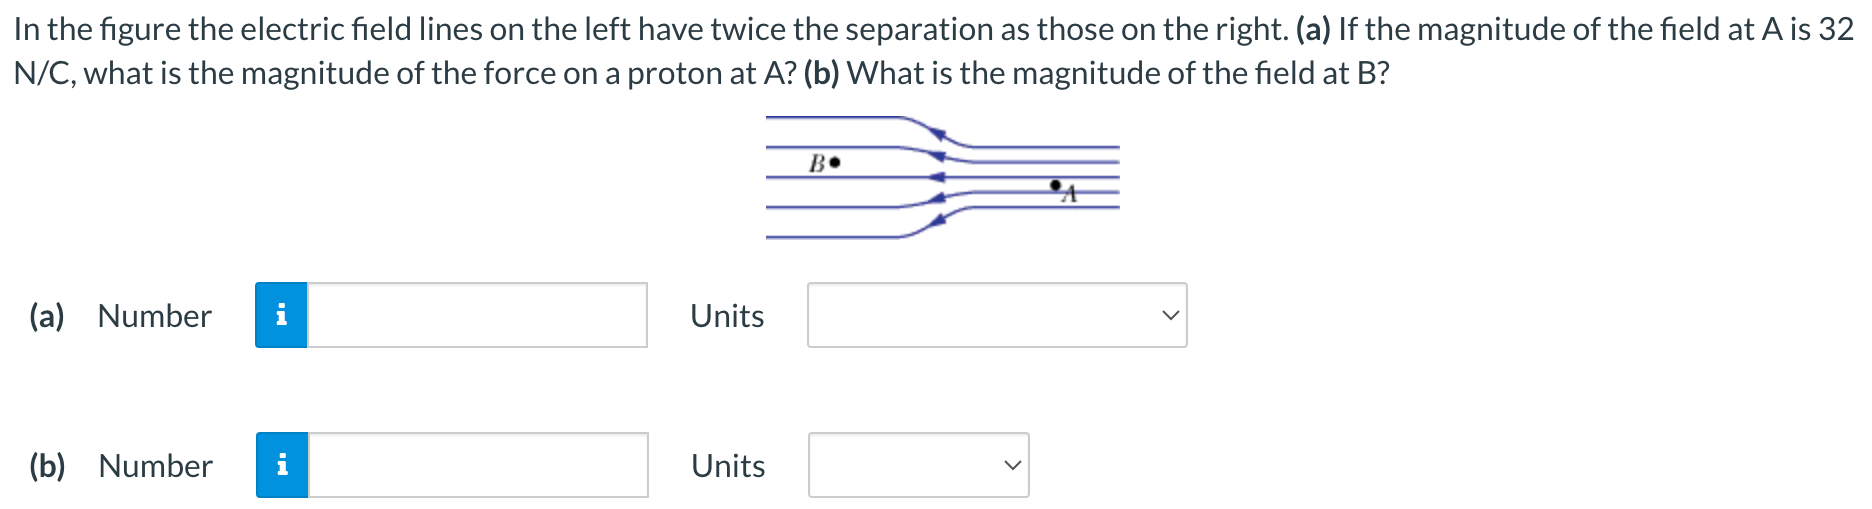 In the figure the electric field lines on the left have twice the separation as those on the right. (a) If the magnitude of the field at A is 32 N/C, what is the magnitude of the force on a proton at A? (b) What is the magnitude of the field at B ? (a) Number Units (b) Number Units